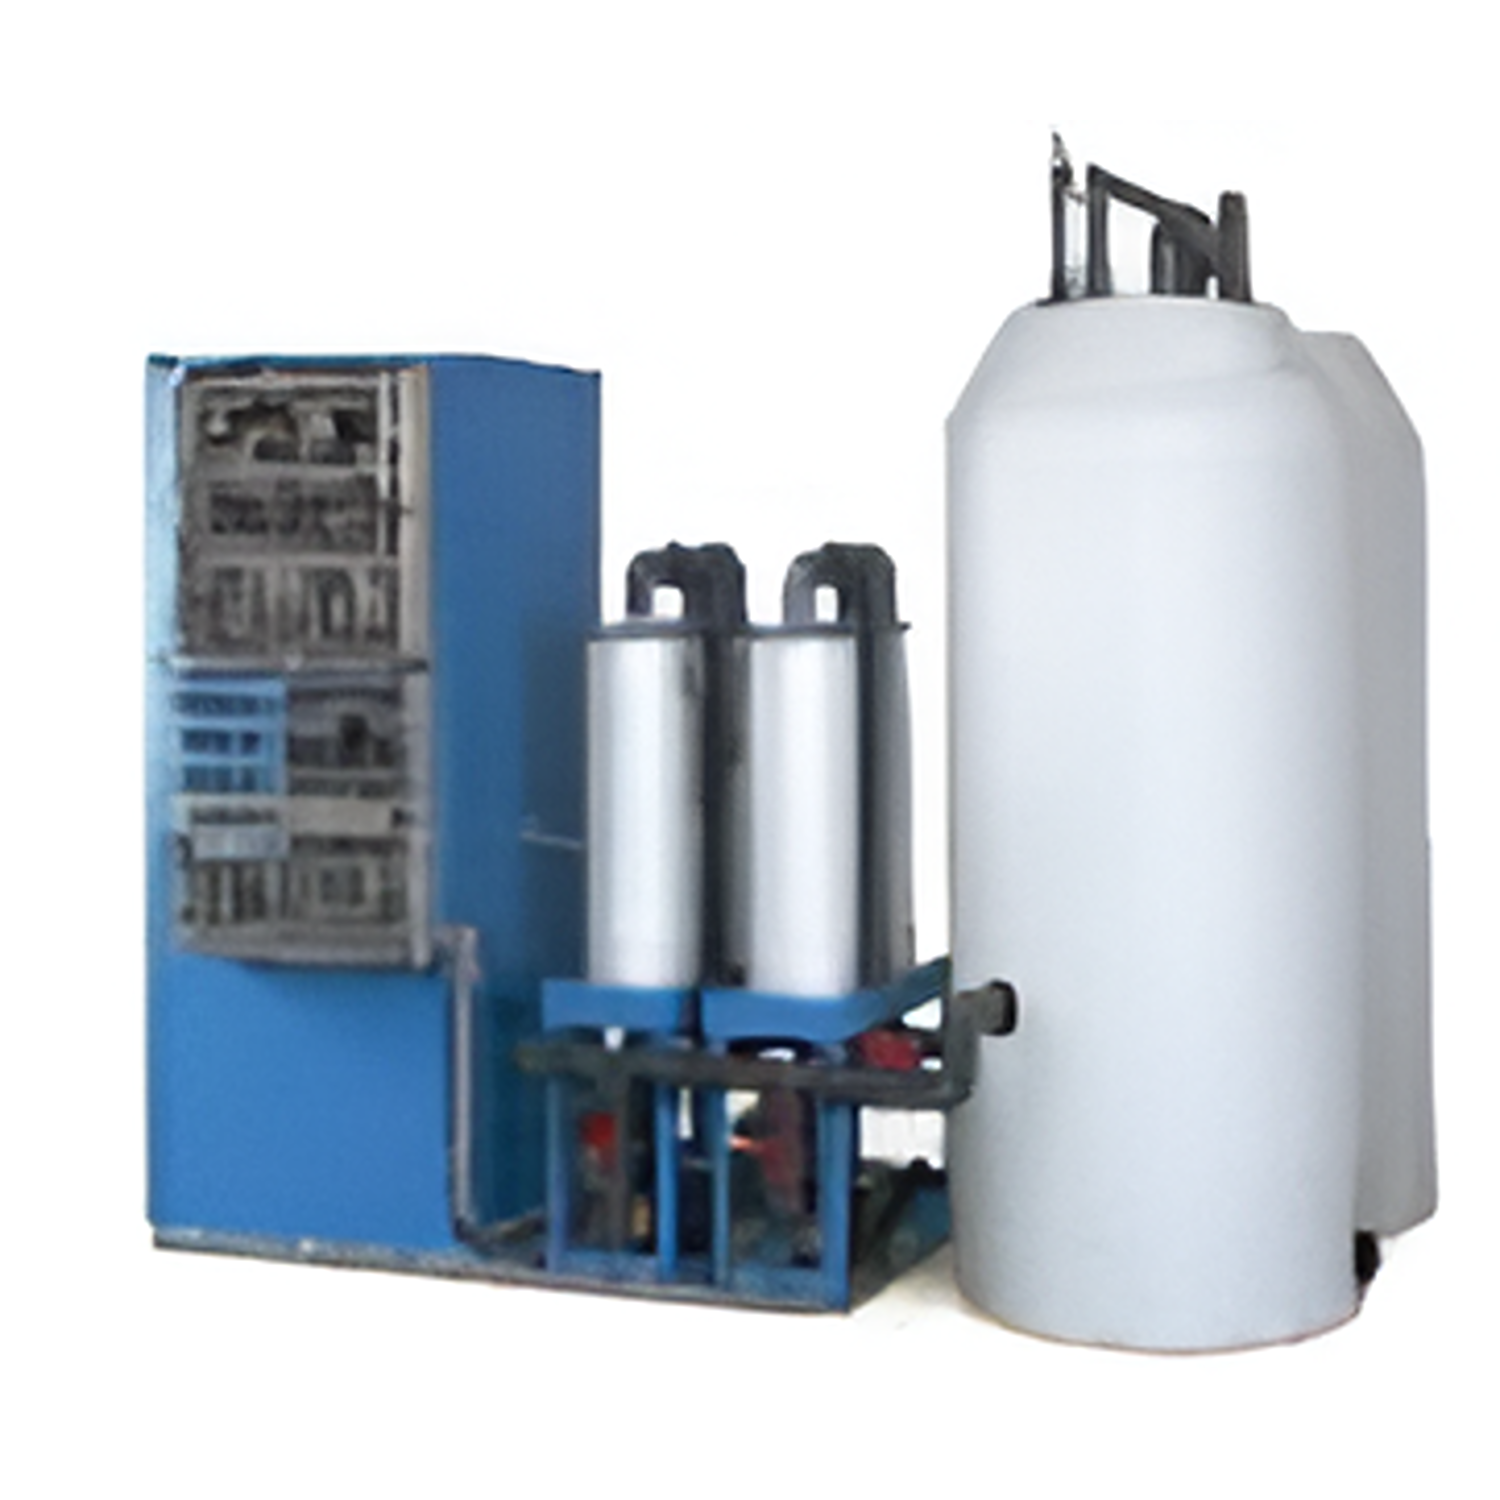 YEW AIK AA00271/AA00272 Automated Waste-Water Treatment System - Premium Automated Waste-Water Treatment System from YEW AIK - Shop now at Yew Aik.